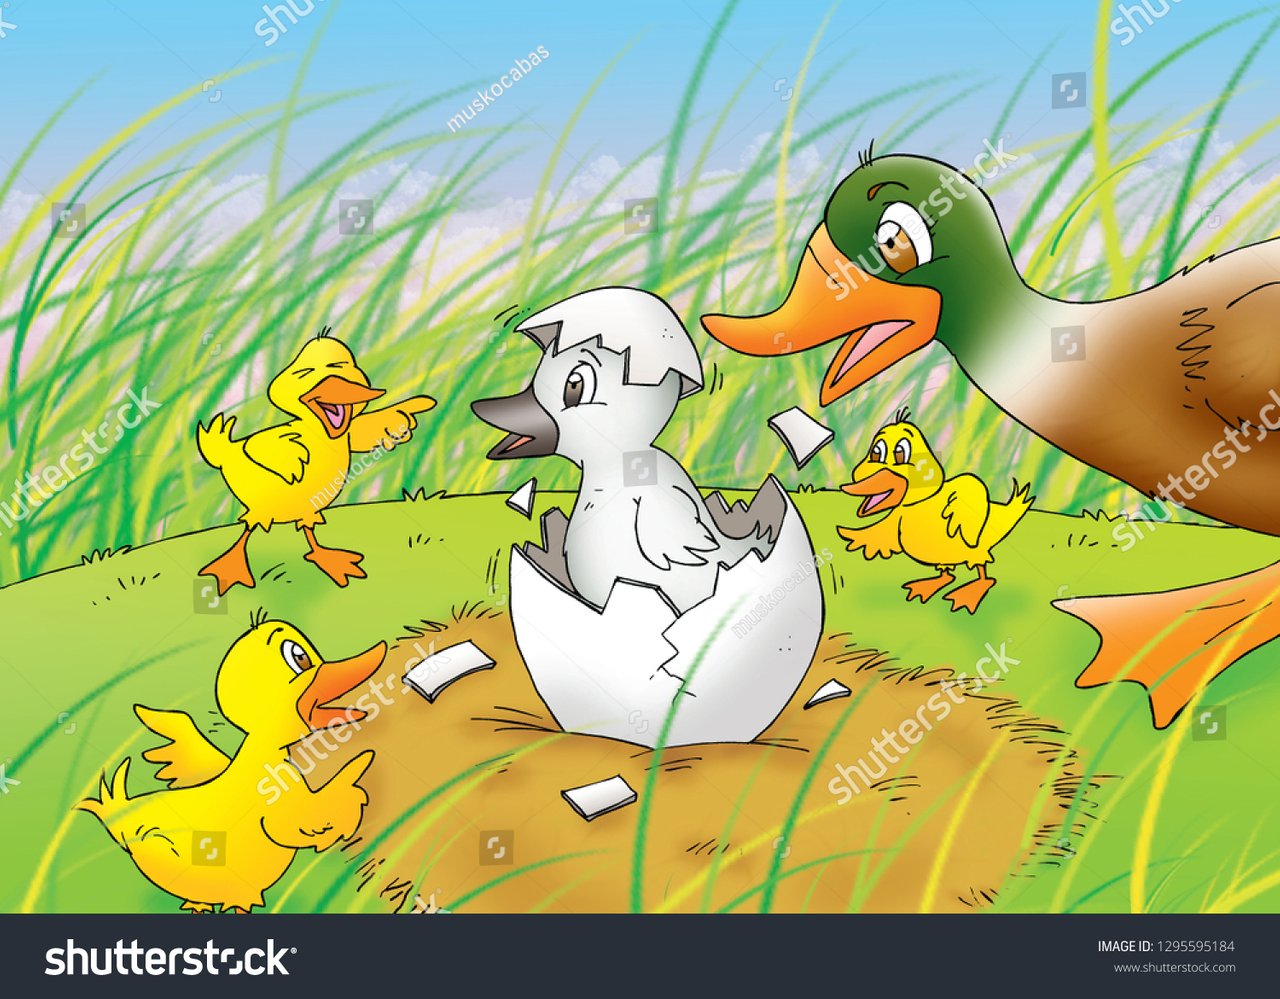 stock-photo-children-s-fairy-tales-ugly-duckling-1295595184.jpg